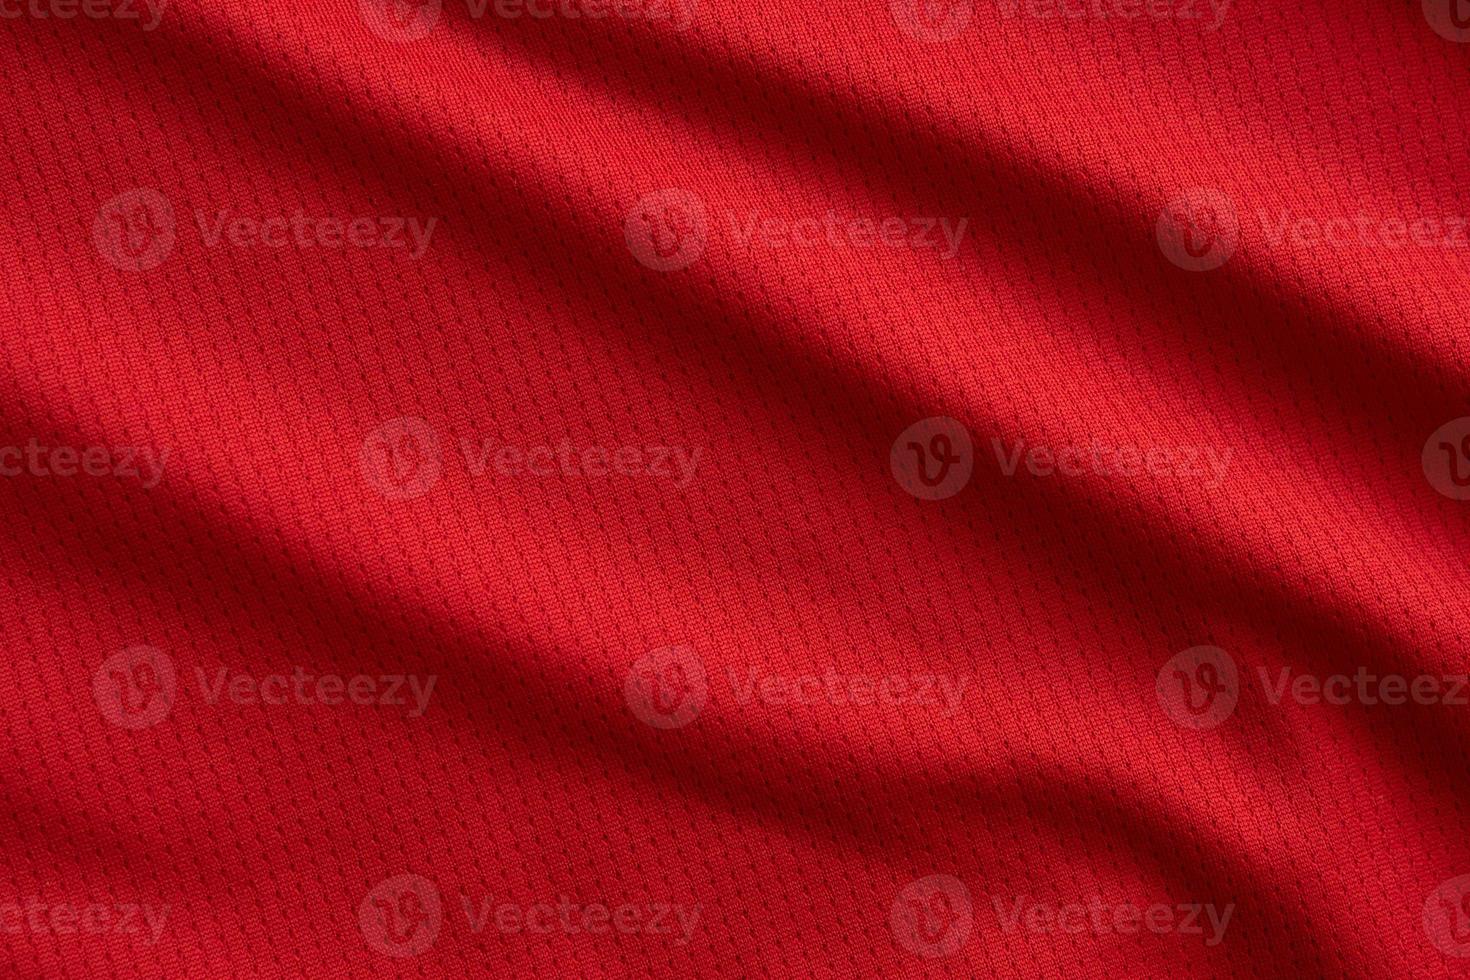 sports clothing fabric football jersey texture top view red color photo